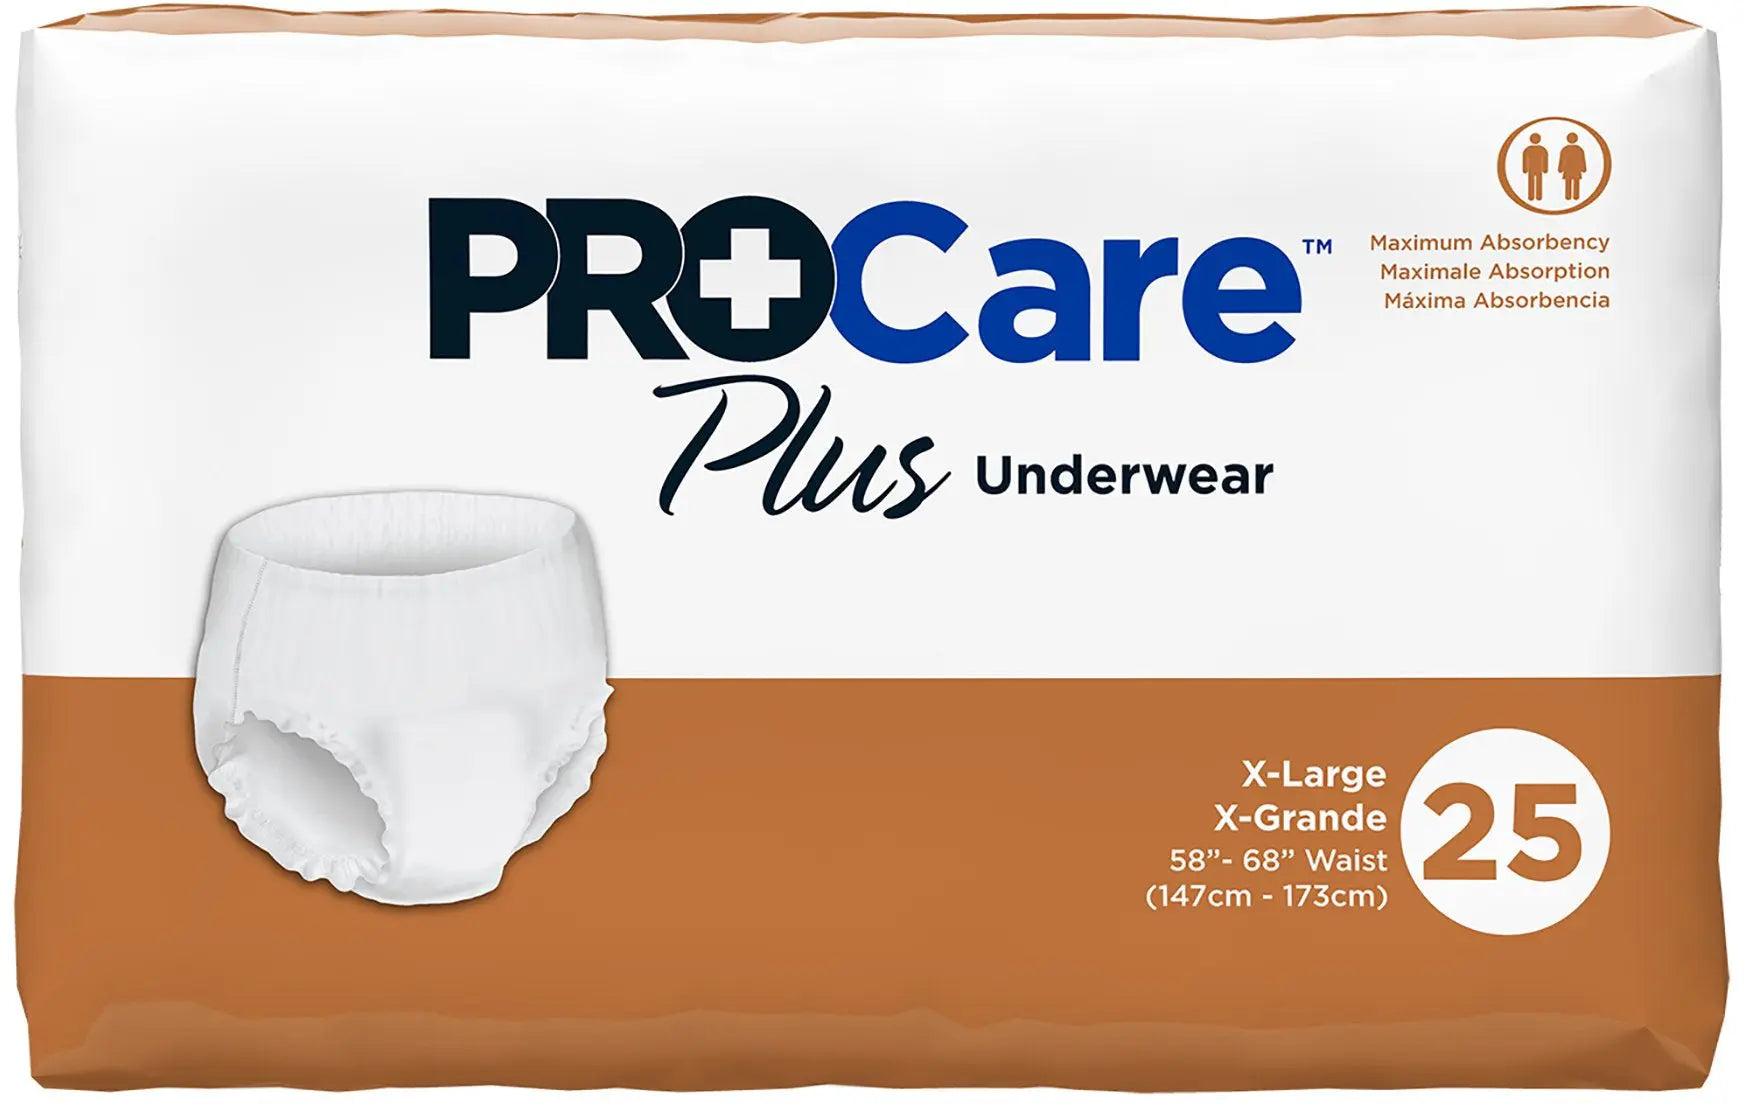 Procare protective underwear, Medium. $25 per box, 8 boxes in stock for  Sale in Brooklyn, NY - OfferUp